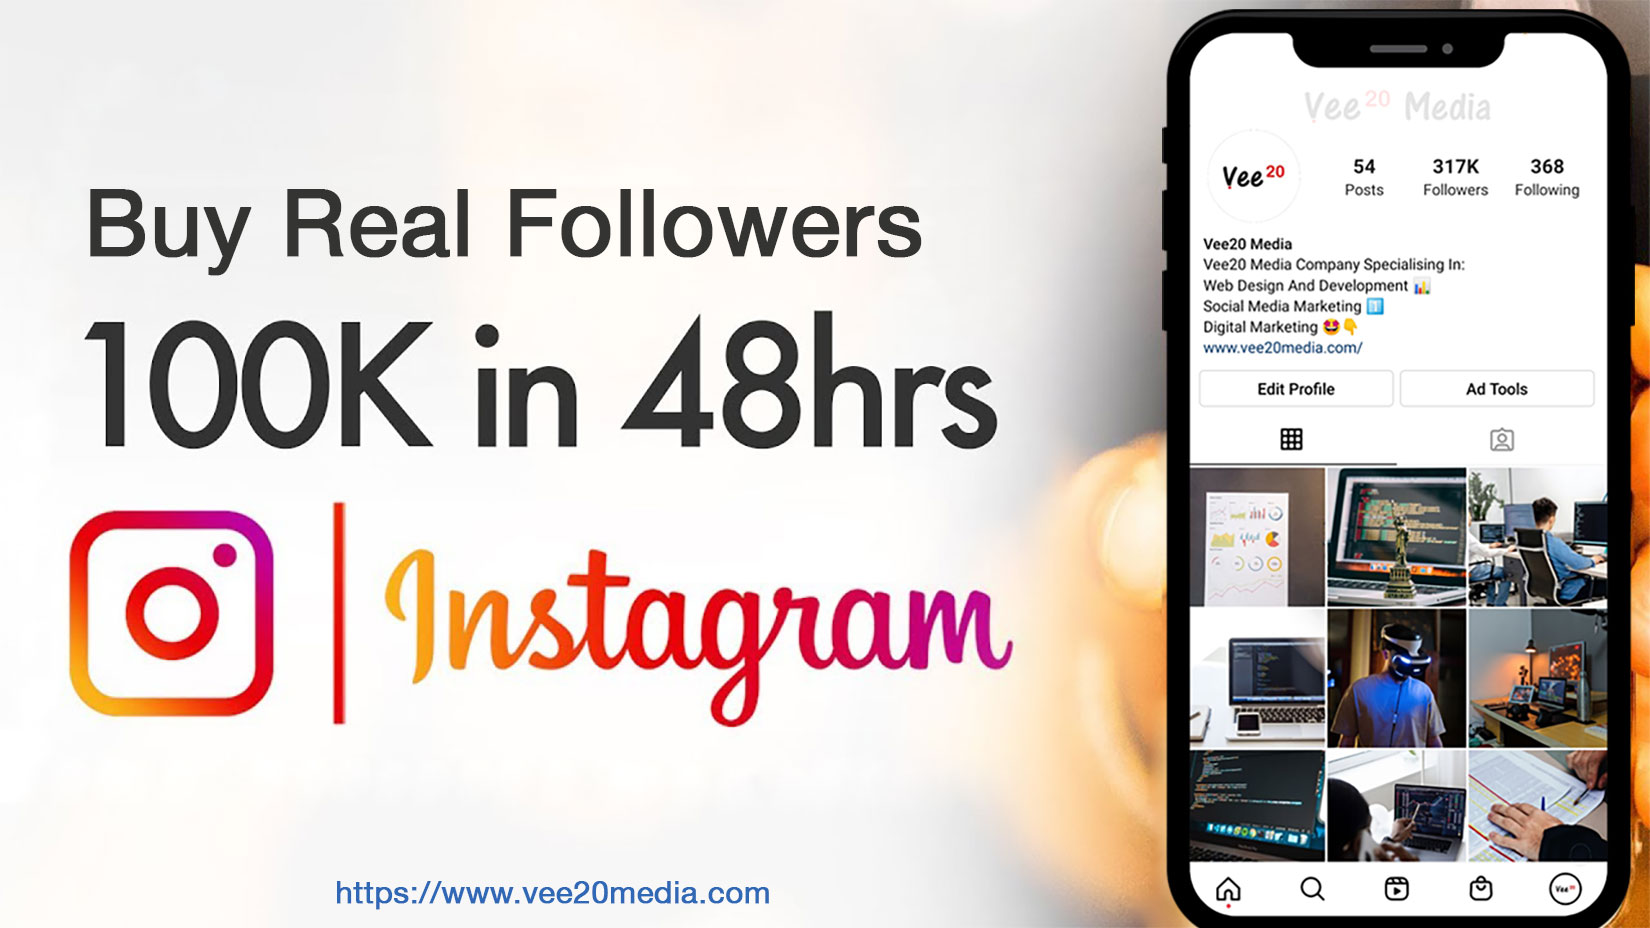 Best Site To Buy Instagram Followers Real & Active - New York P_2145bktsu1